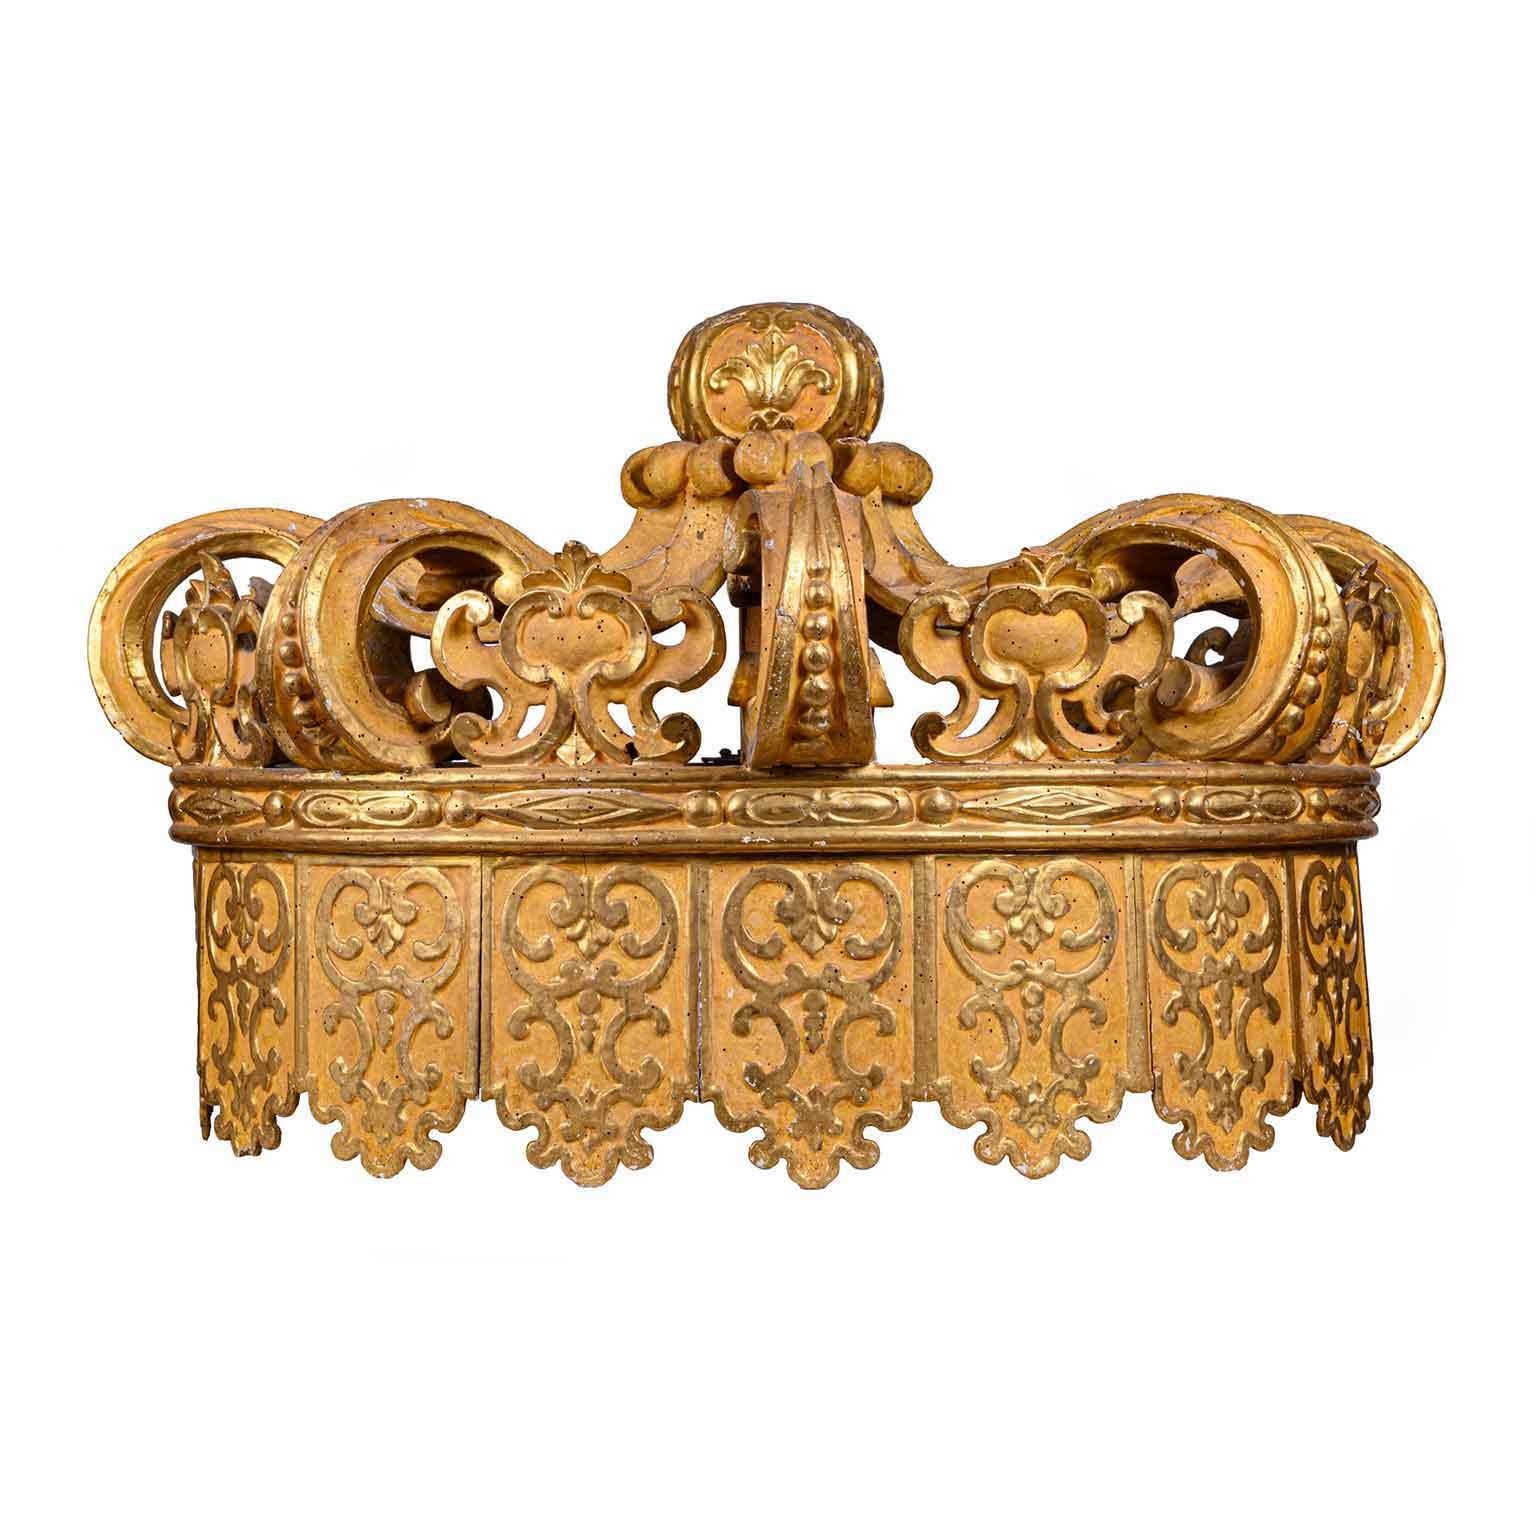 Hand-Carved Italian Throne Corona Early 18th Century Louis XIV Gilt Wood Crown Bed Canape